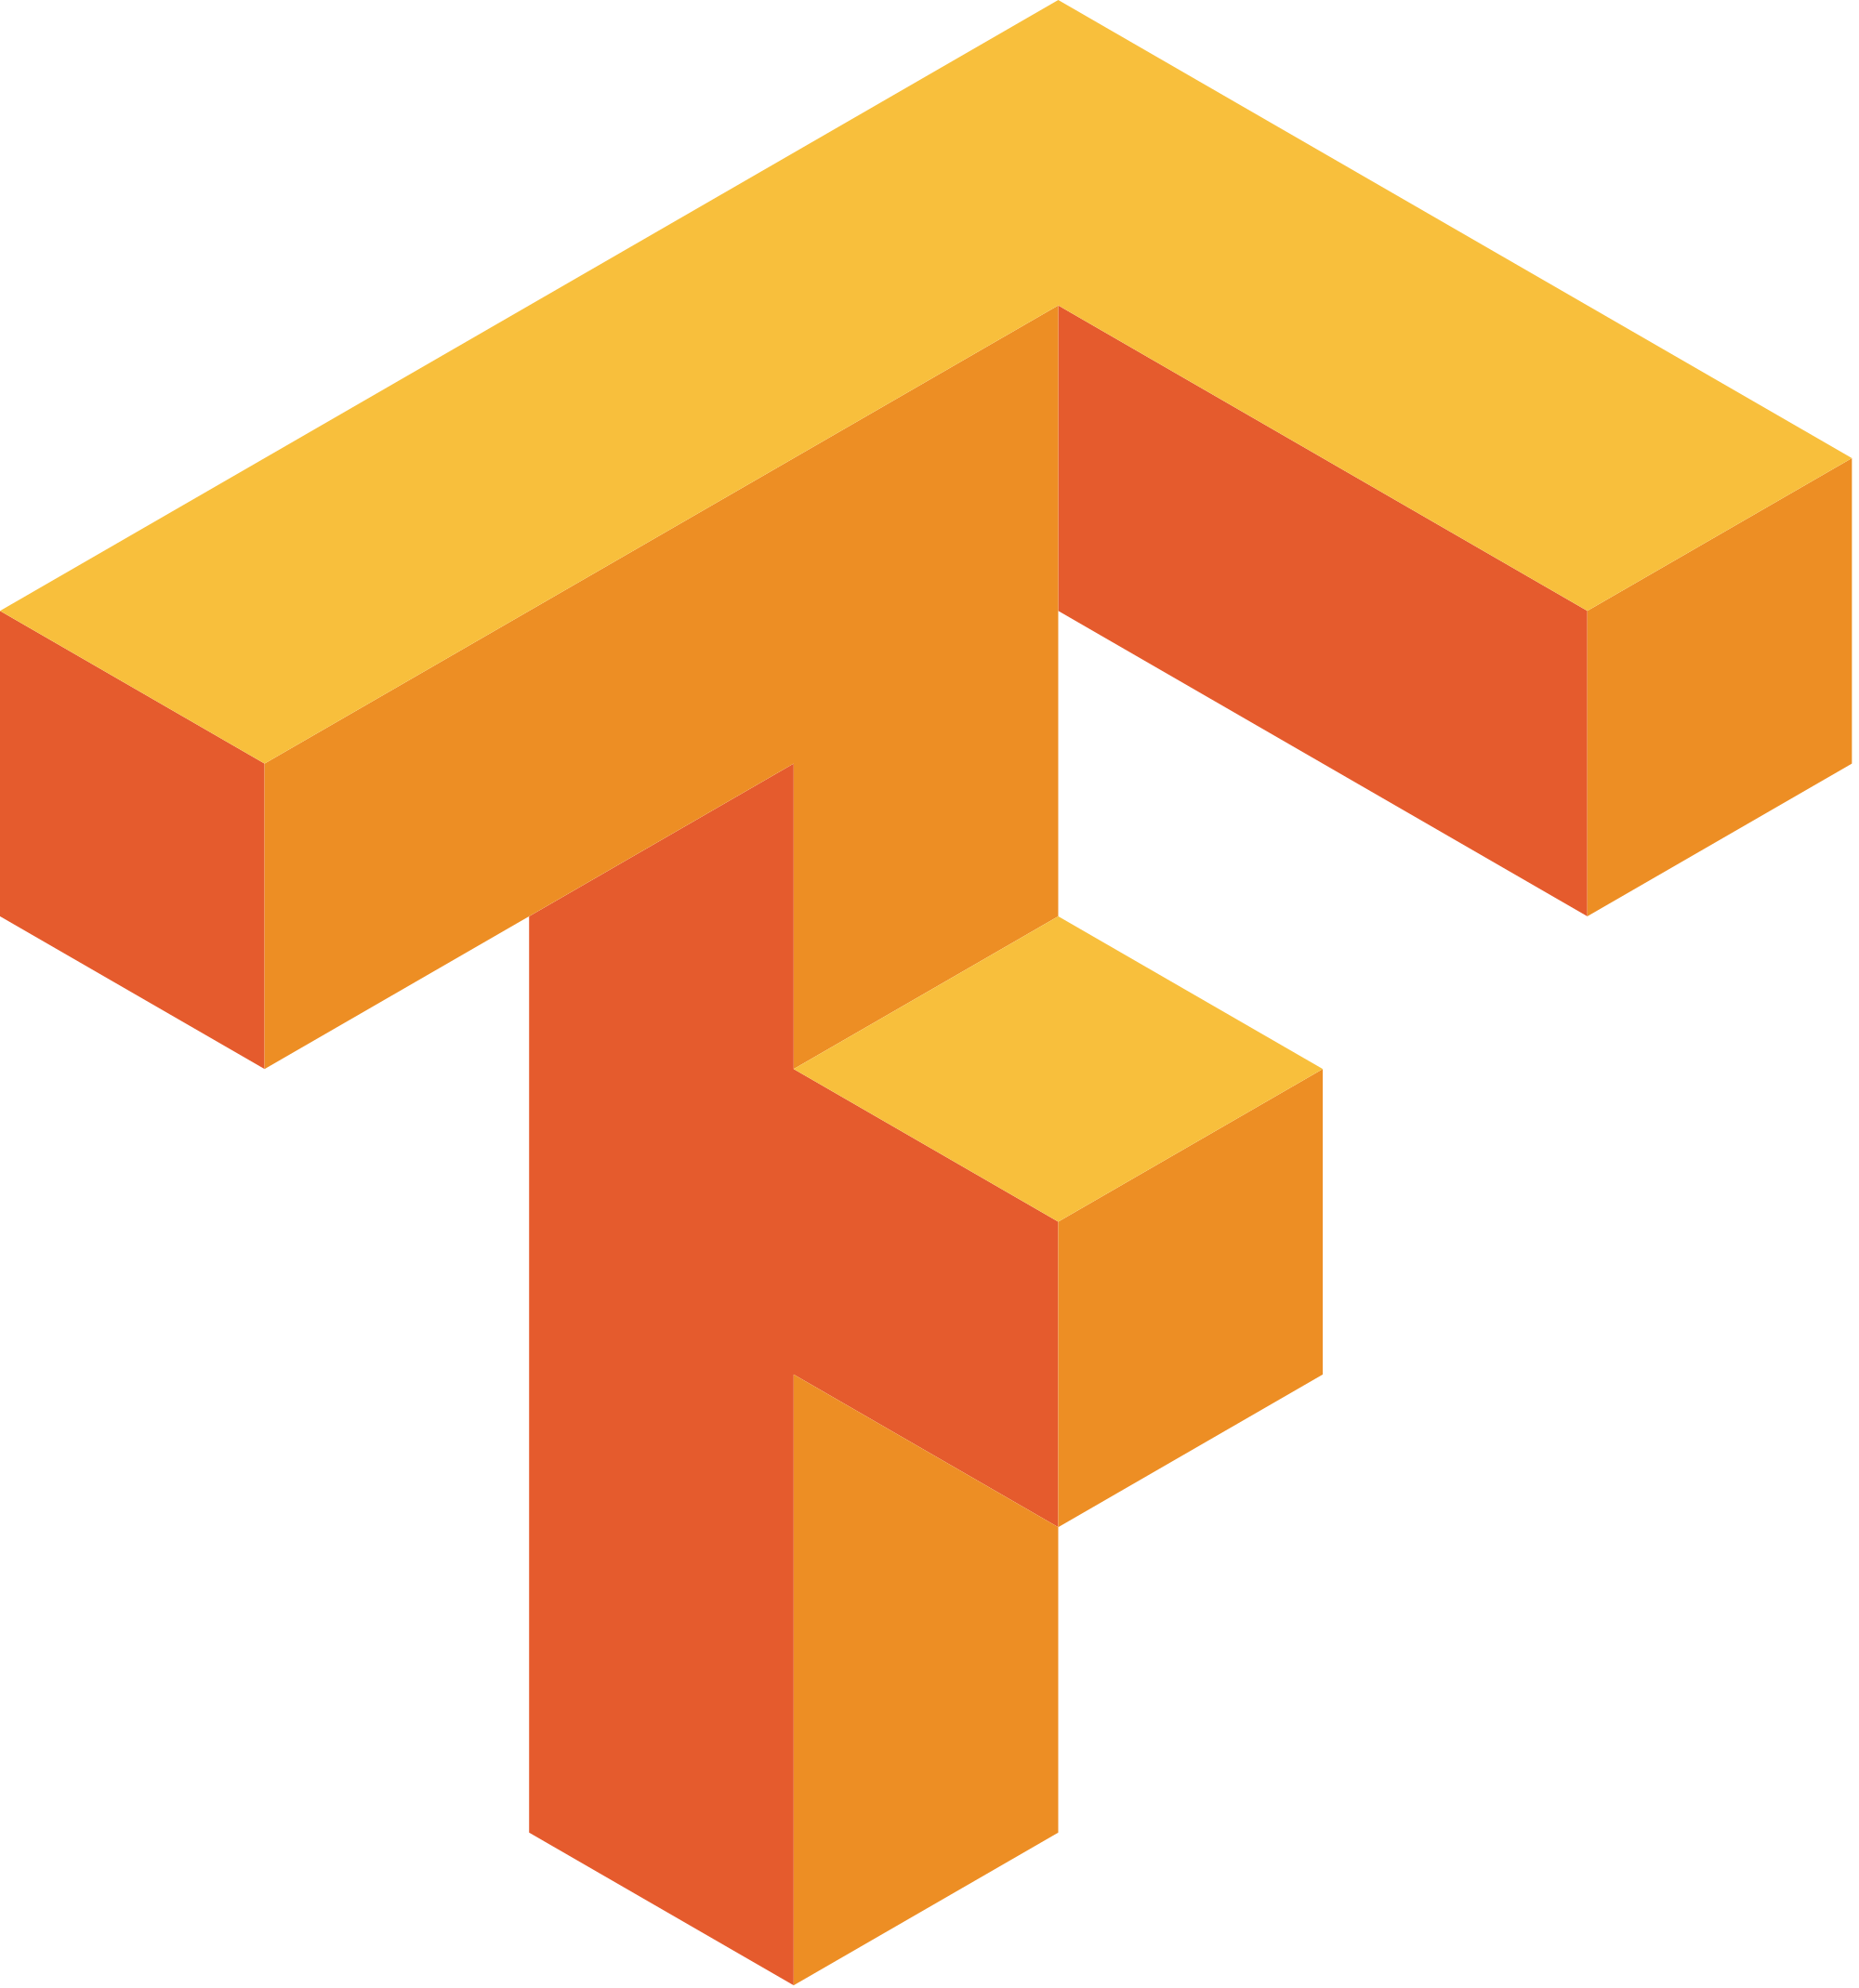 Building TensorFlow 1.4 from Source to Support Intel CPU w/ Anaconda